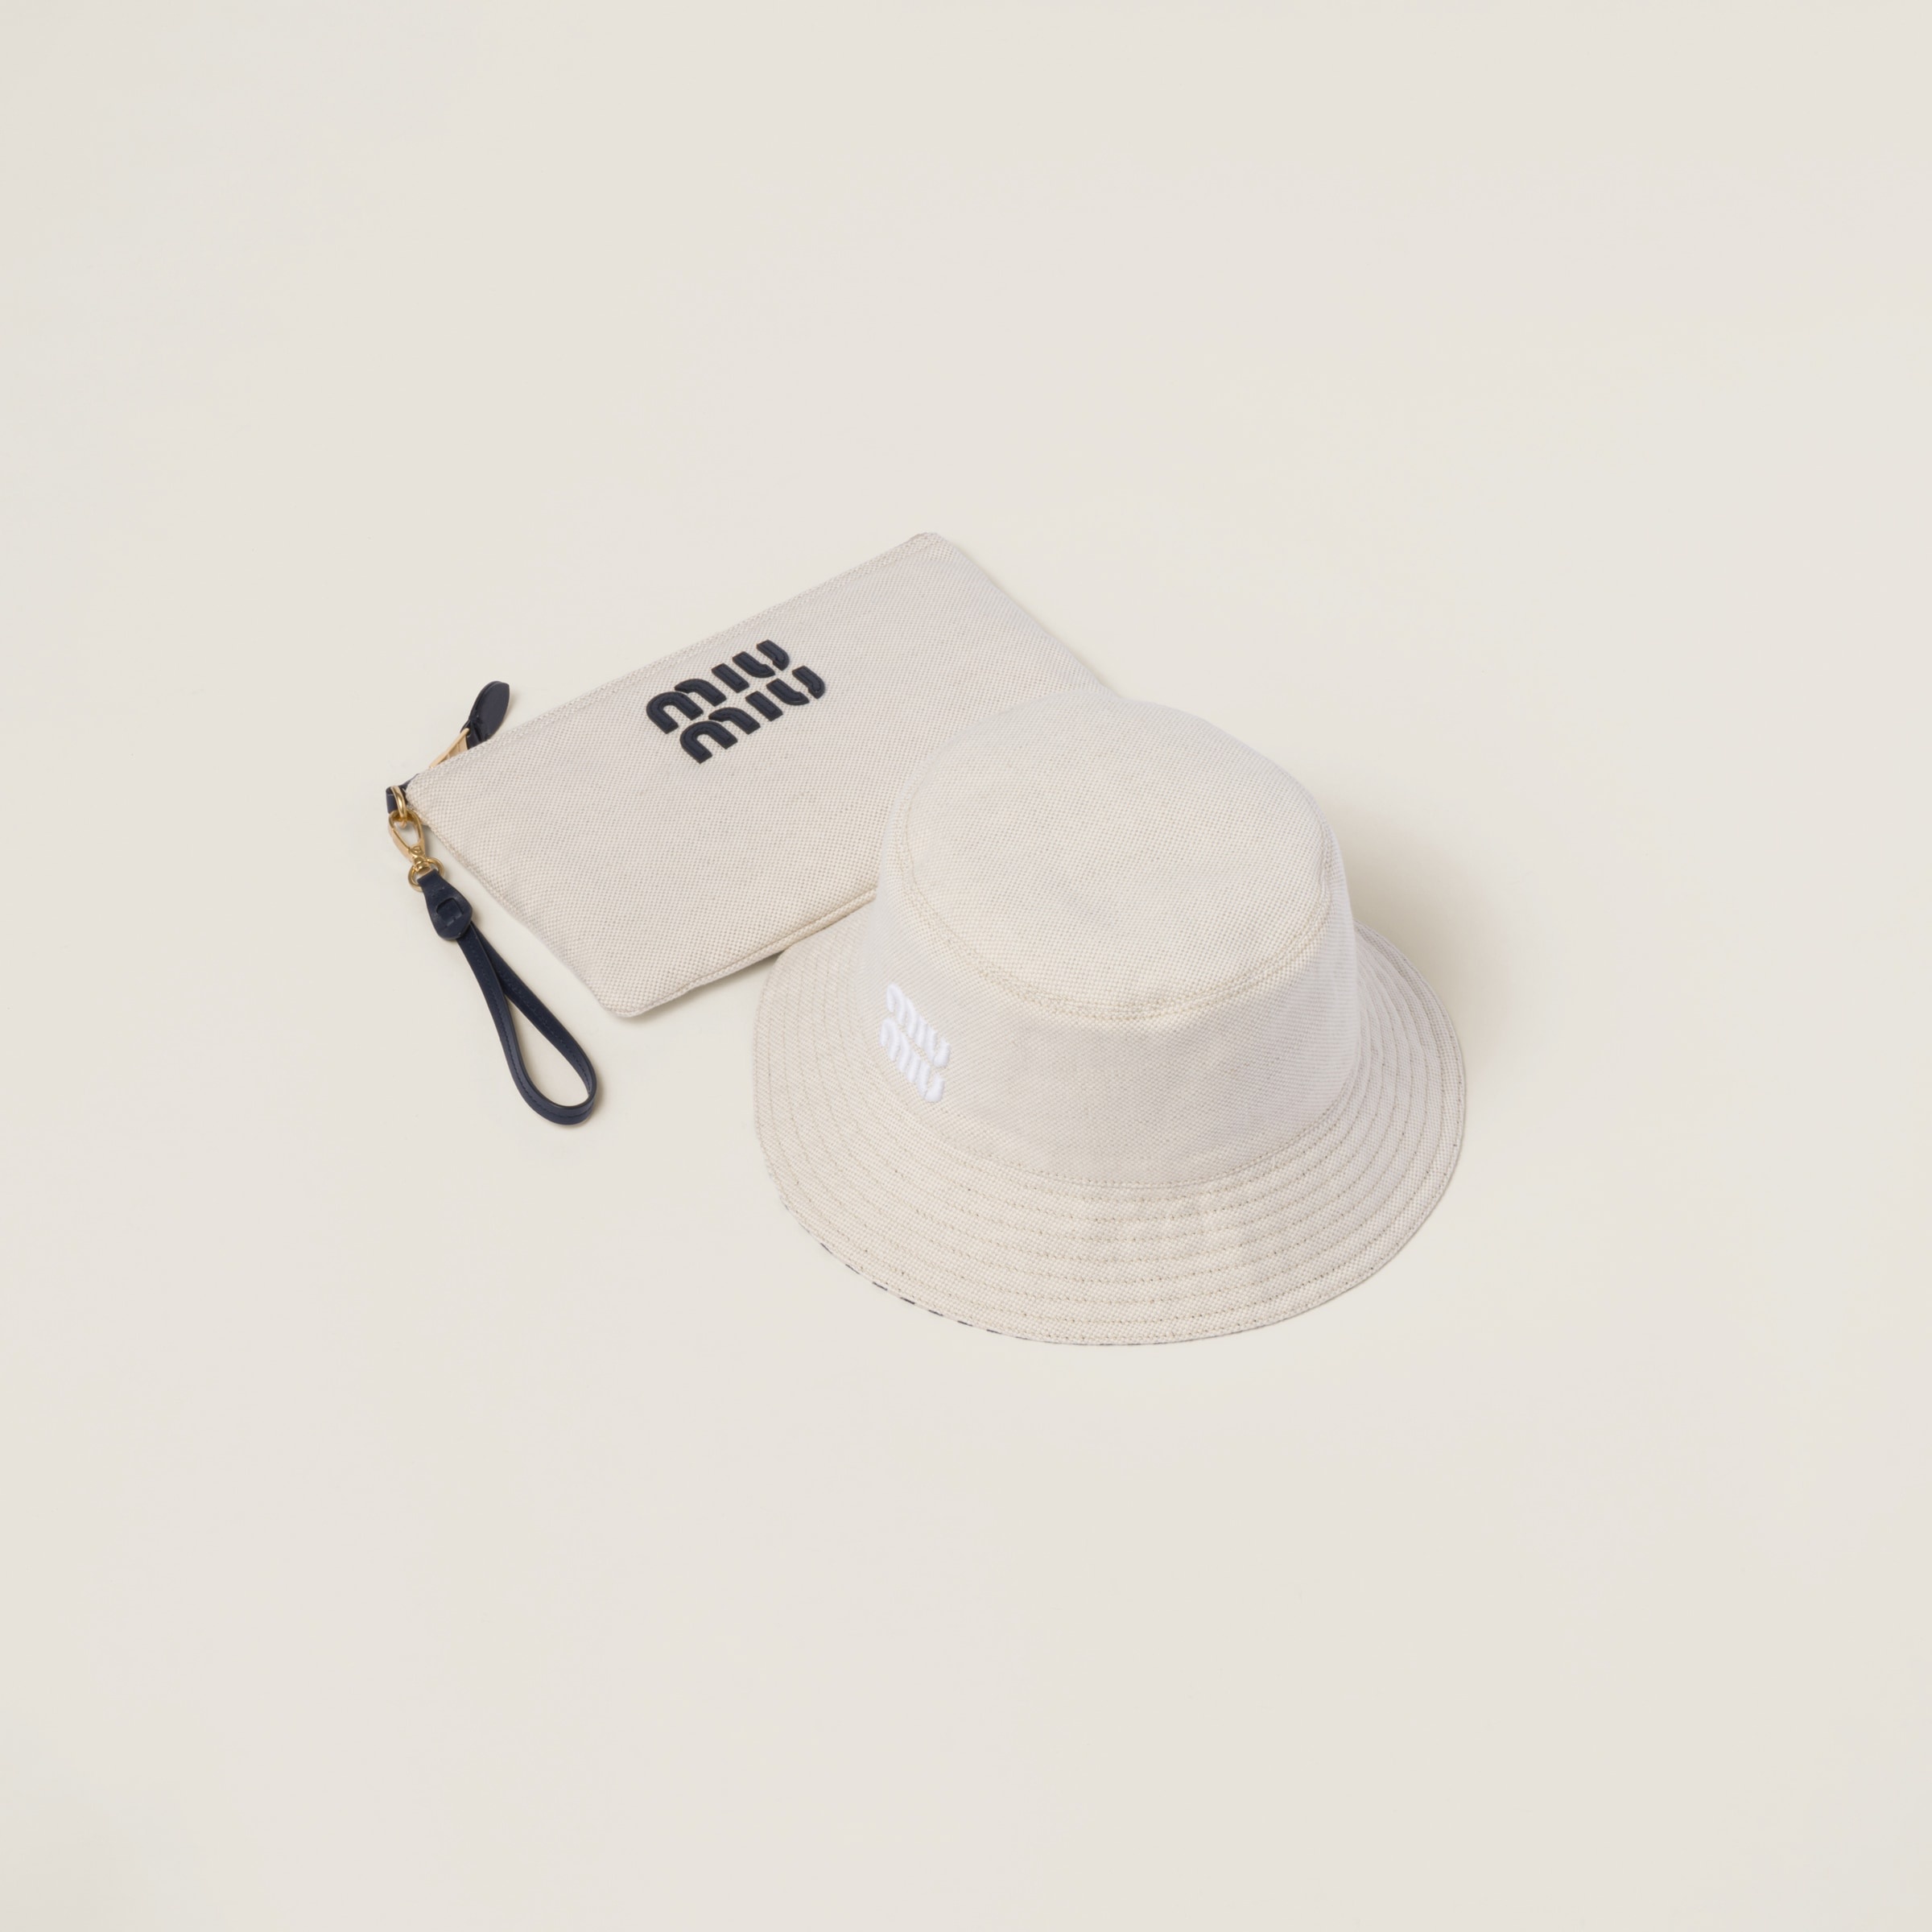 Reversible hat with pouch - 1